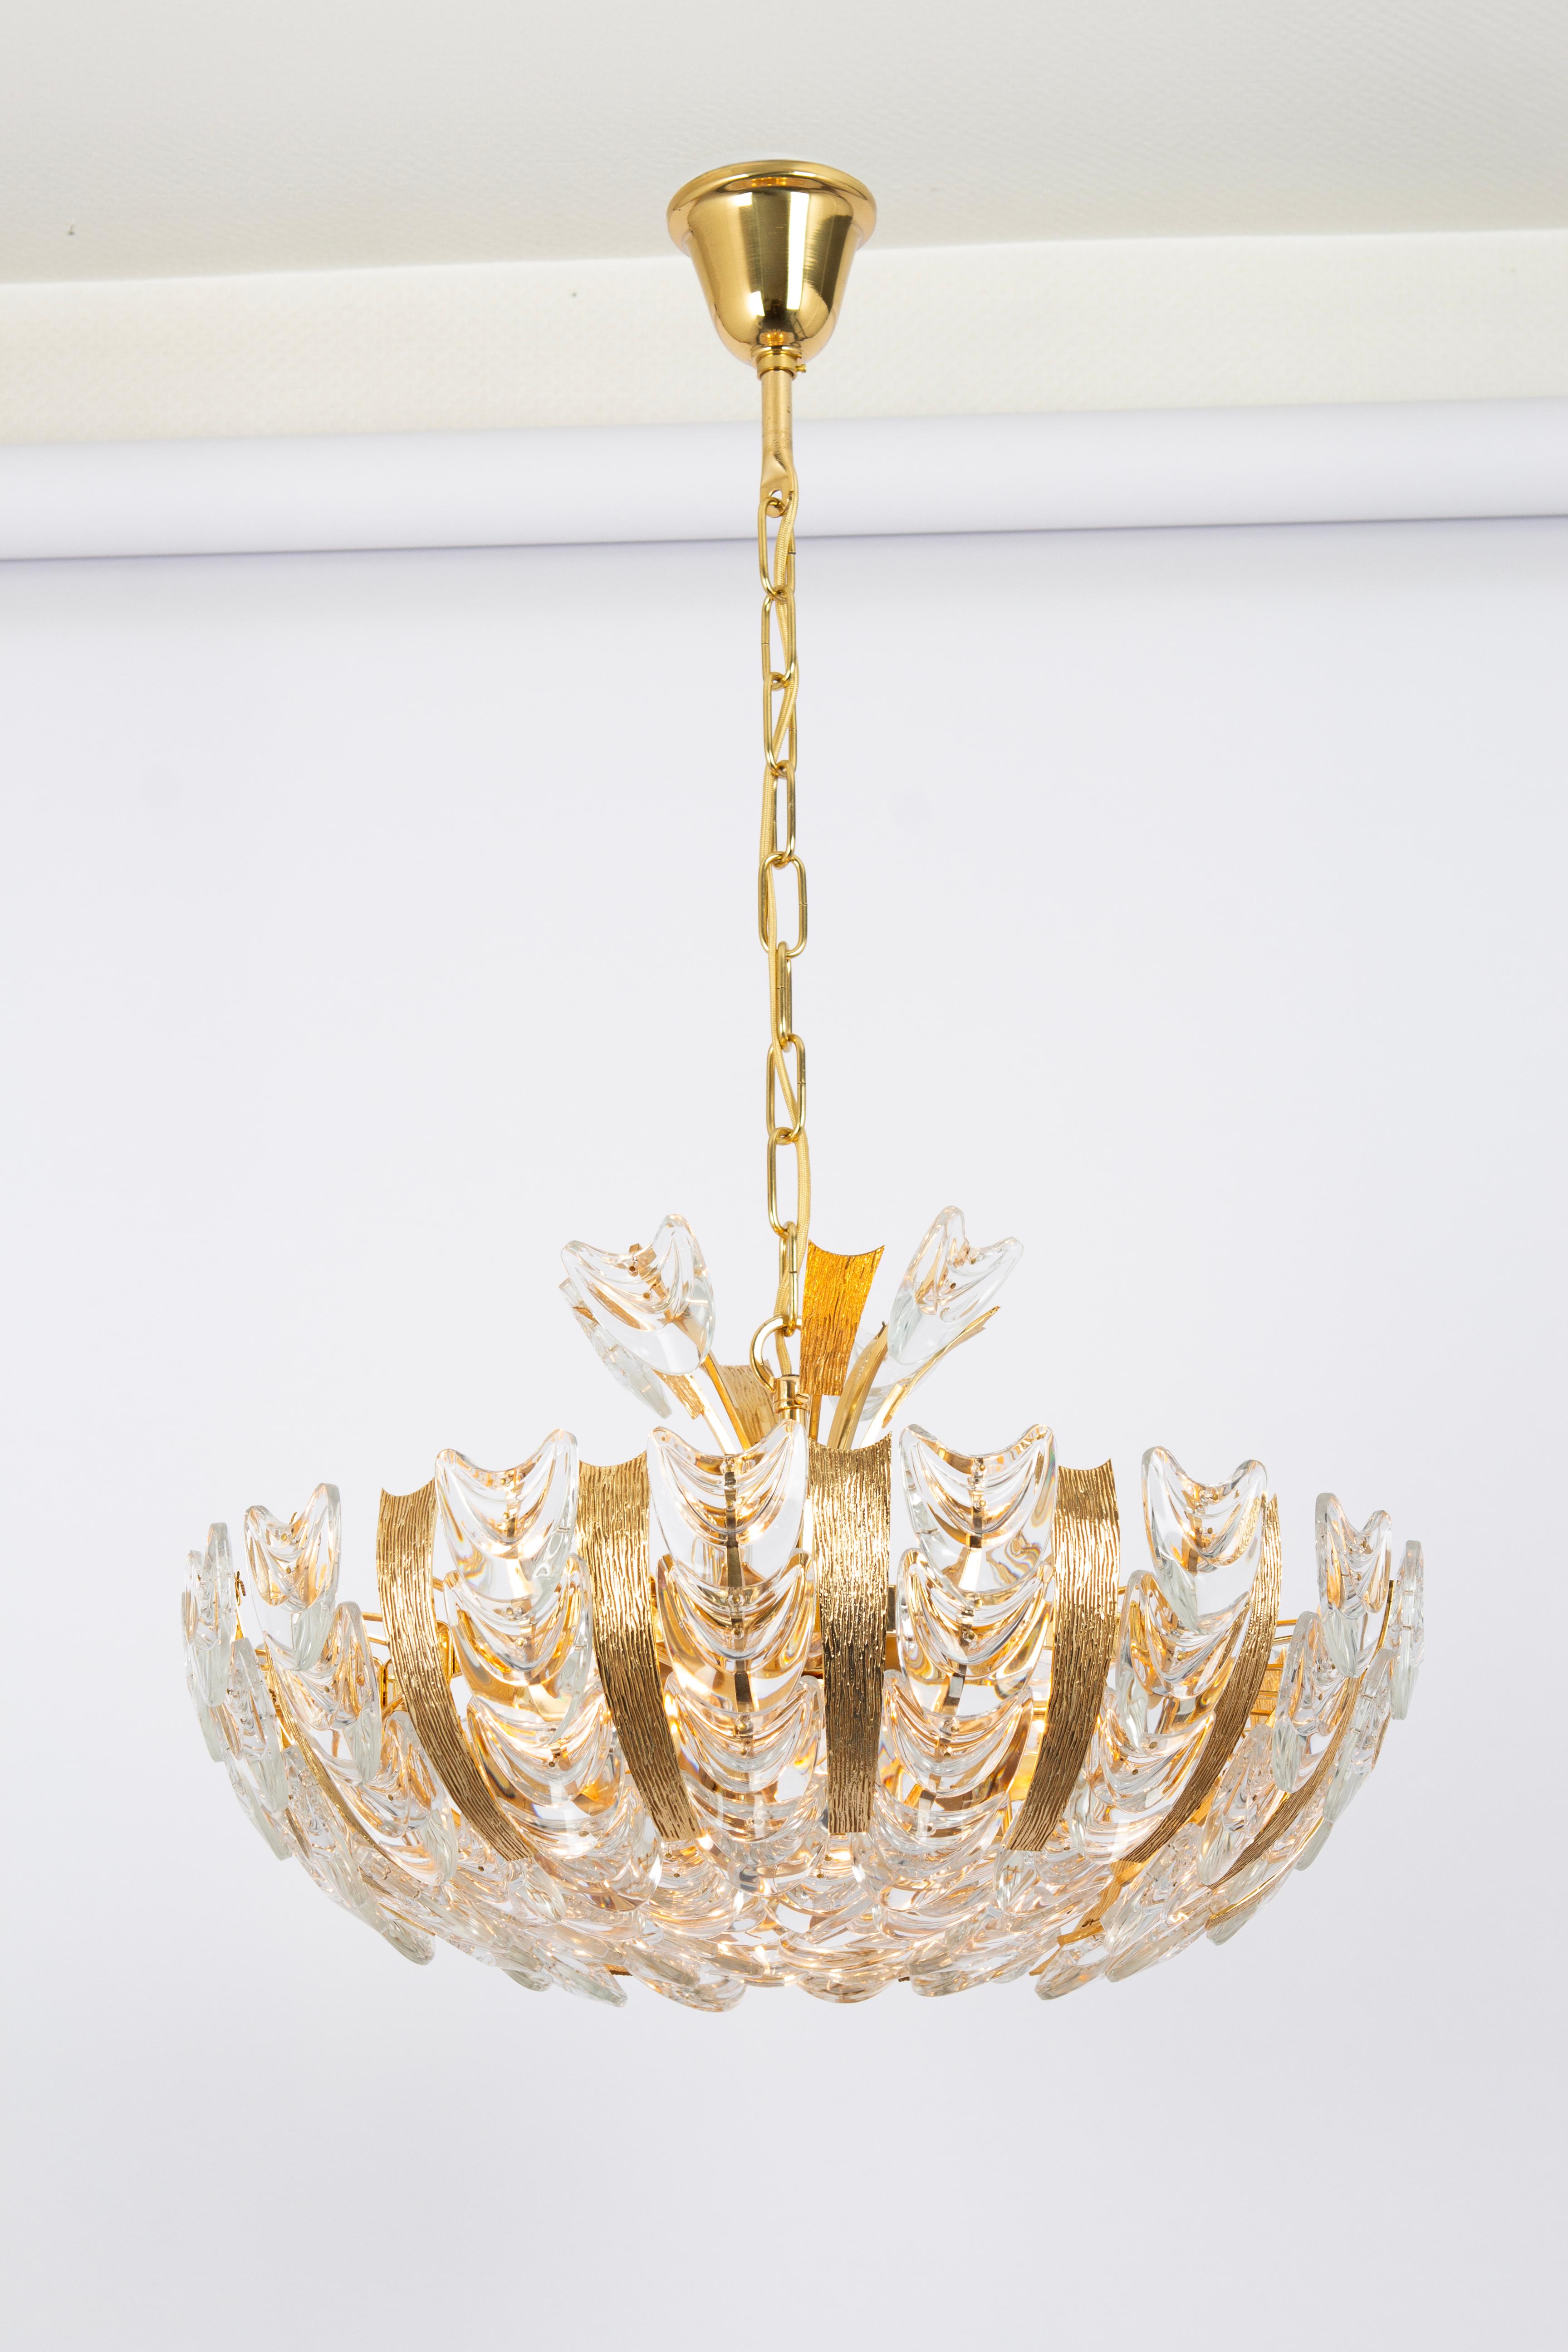 Delicate Gilt Brass Crystal-Glass Flower Chandelier by Palwa, Germany, 1970s For Sale 6